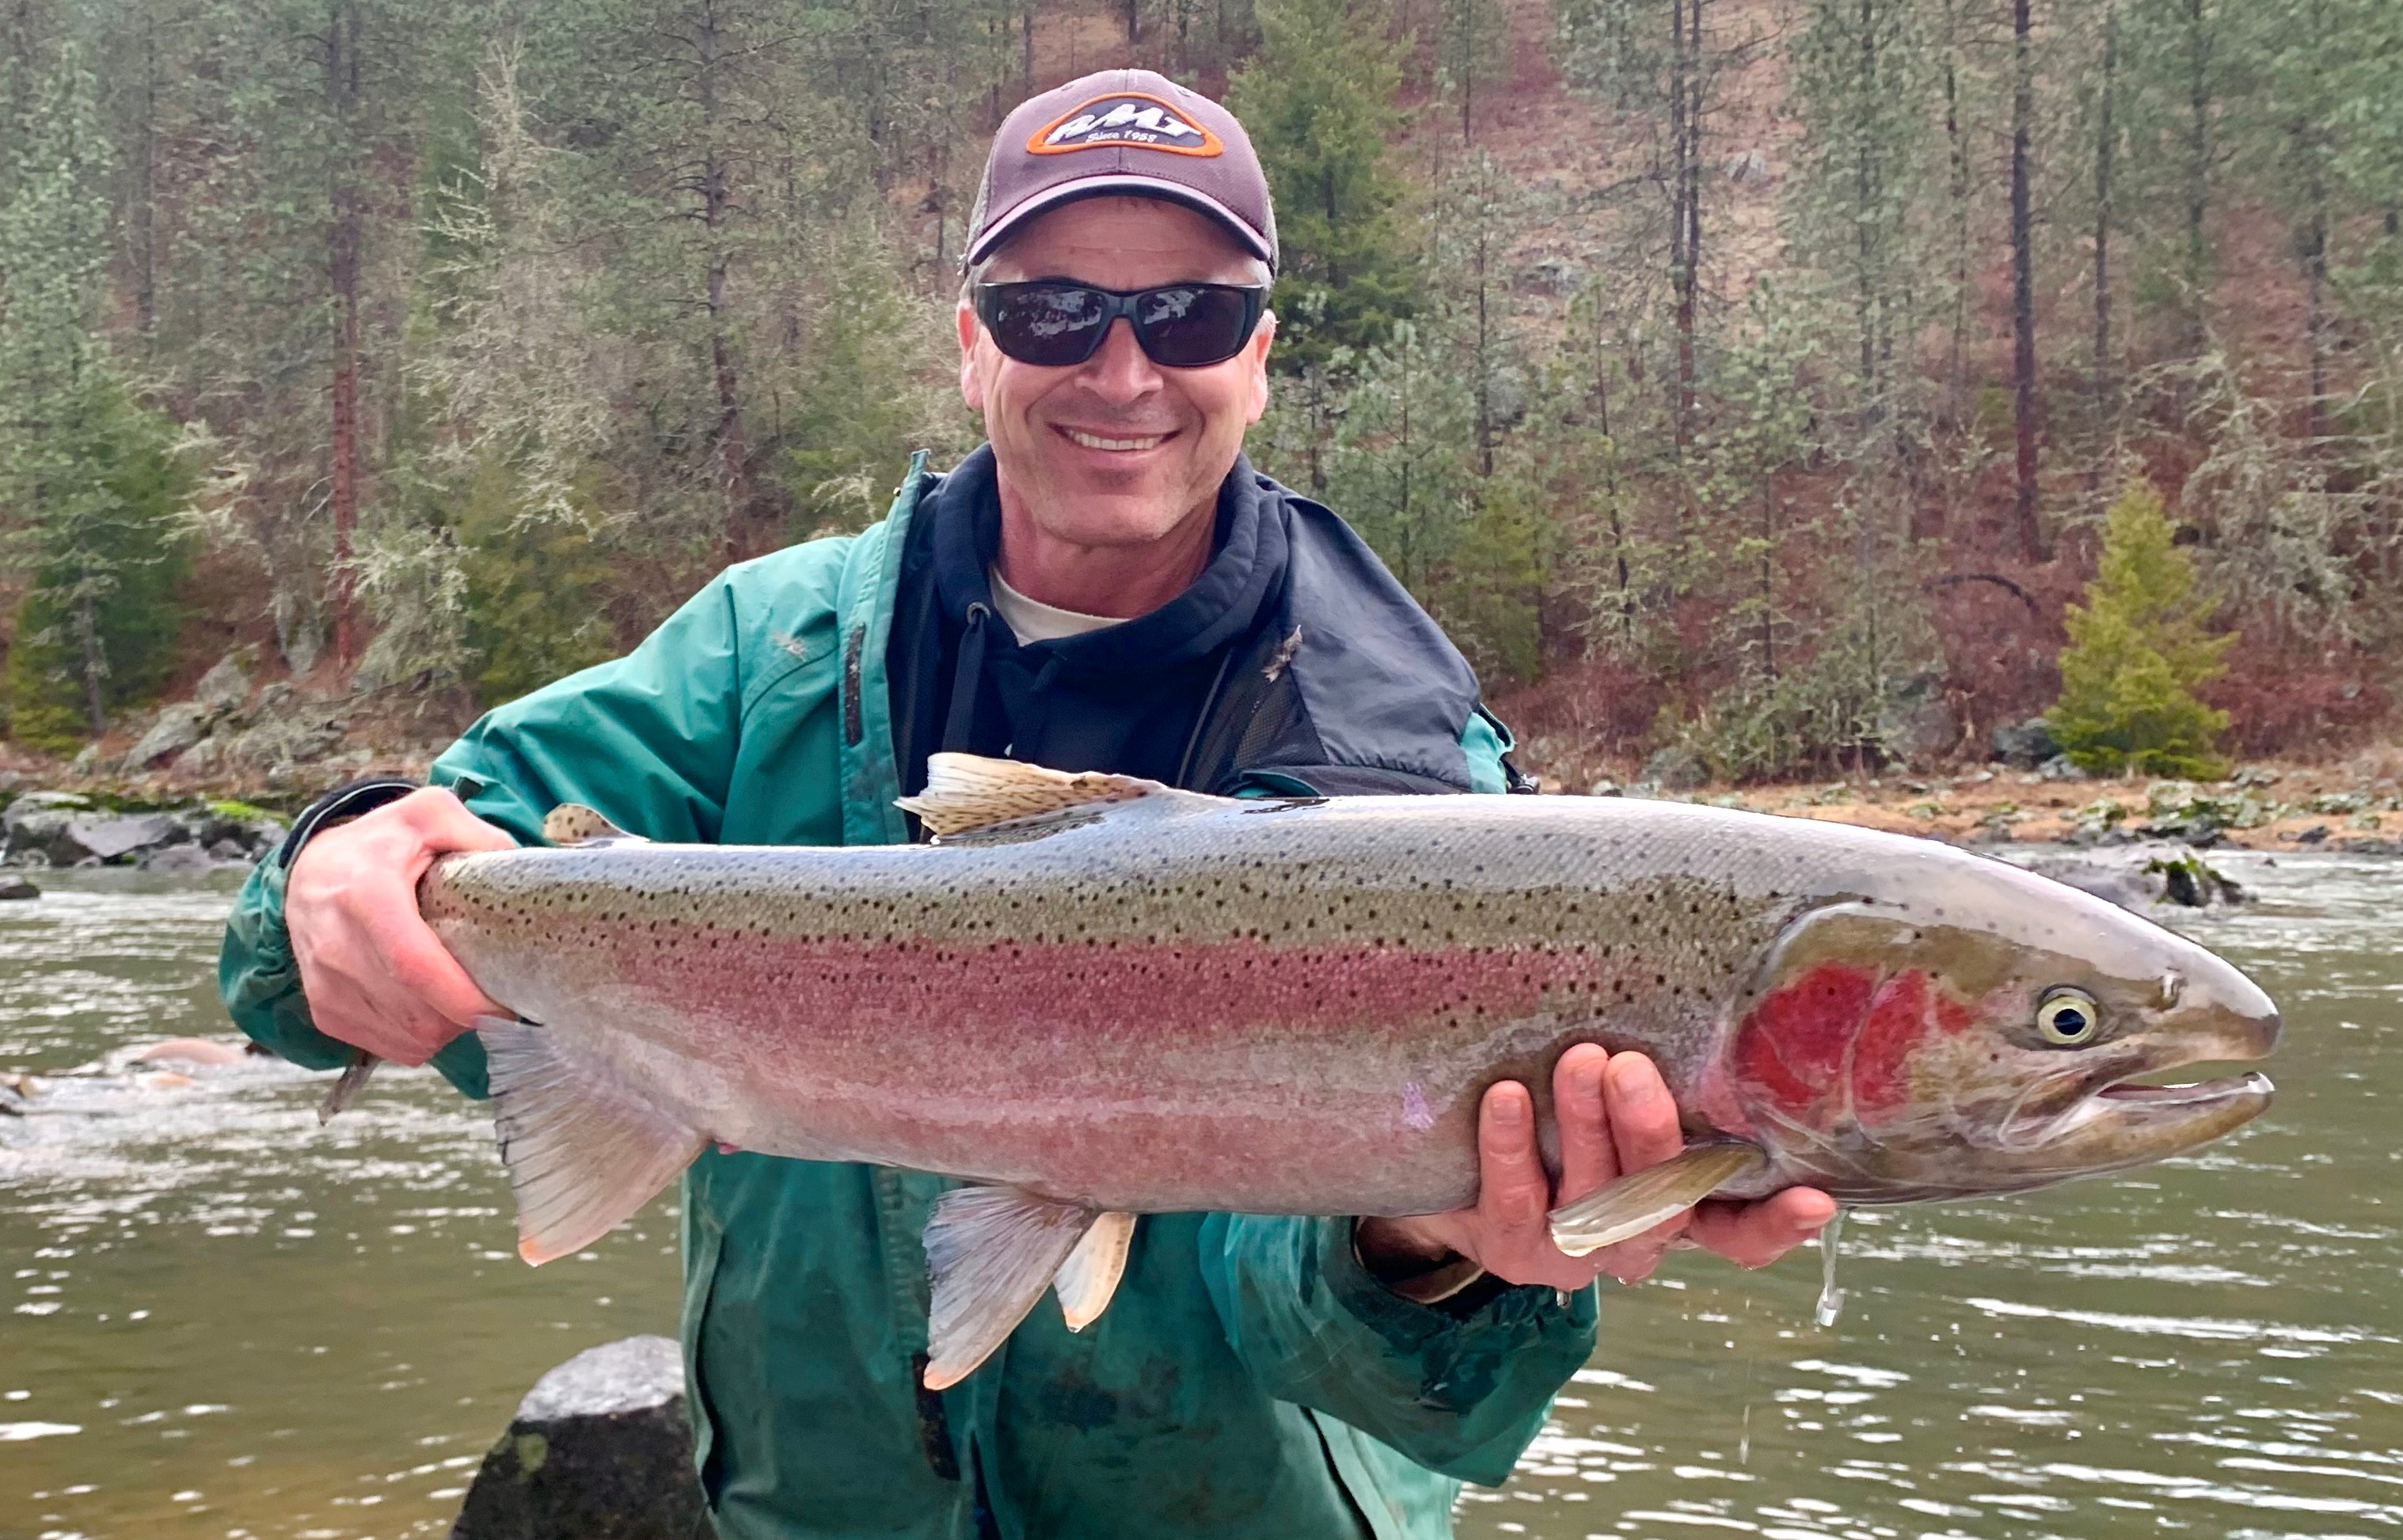 A Winter's Hope: How to Hone Your Steelhead Skills in Times of